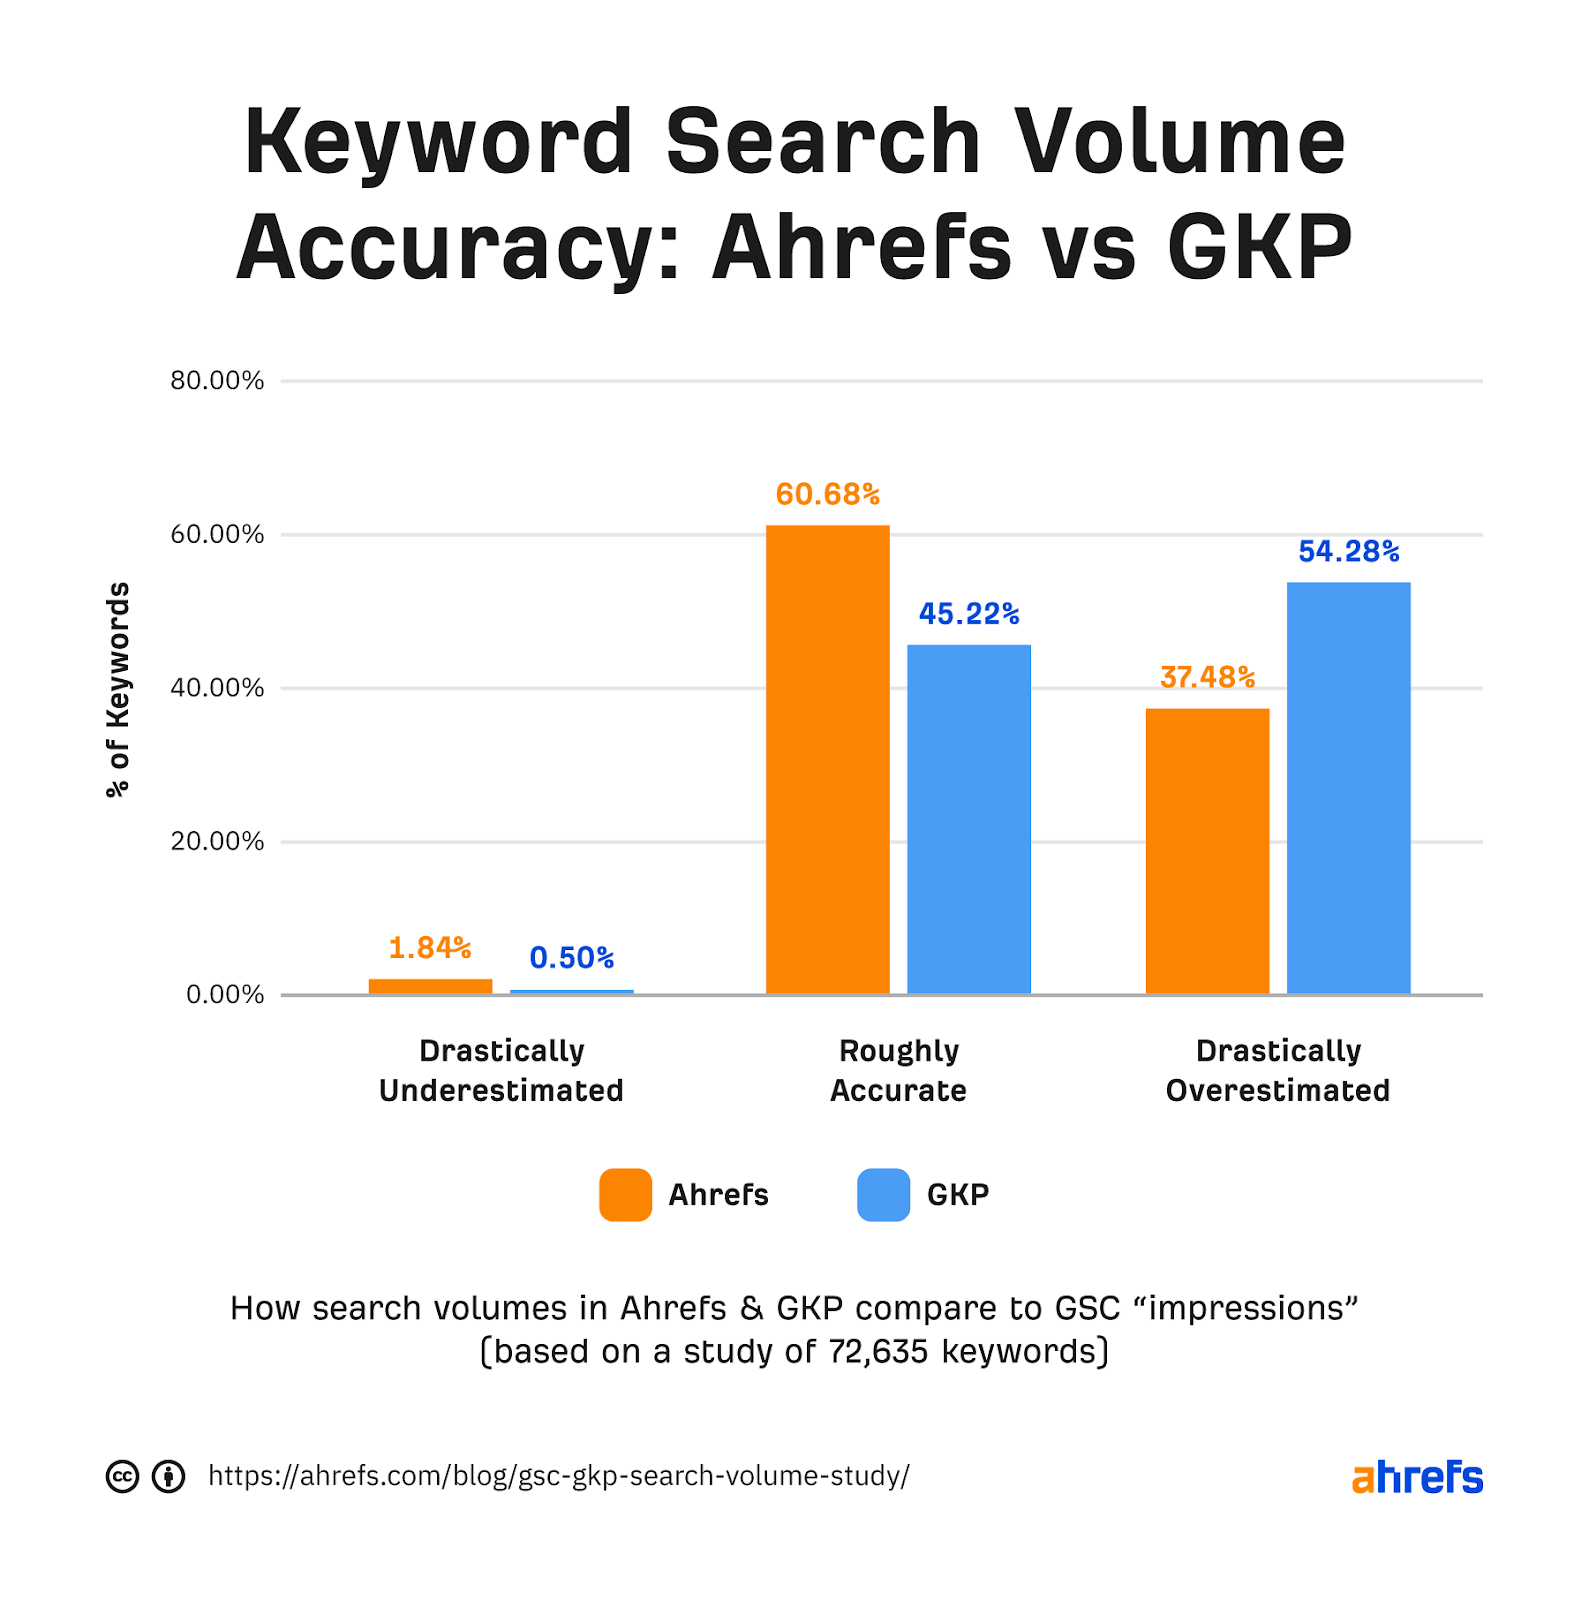 Bar chart showing Ahrefs is more accurate than GKP